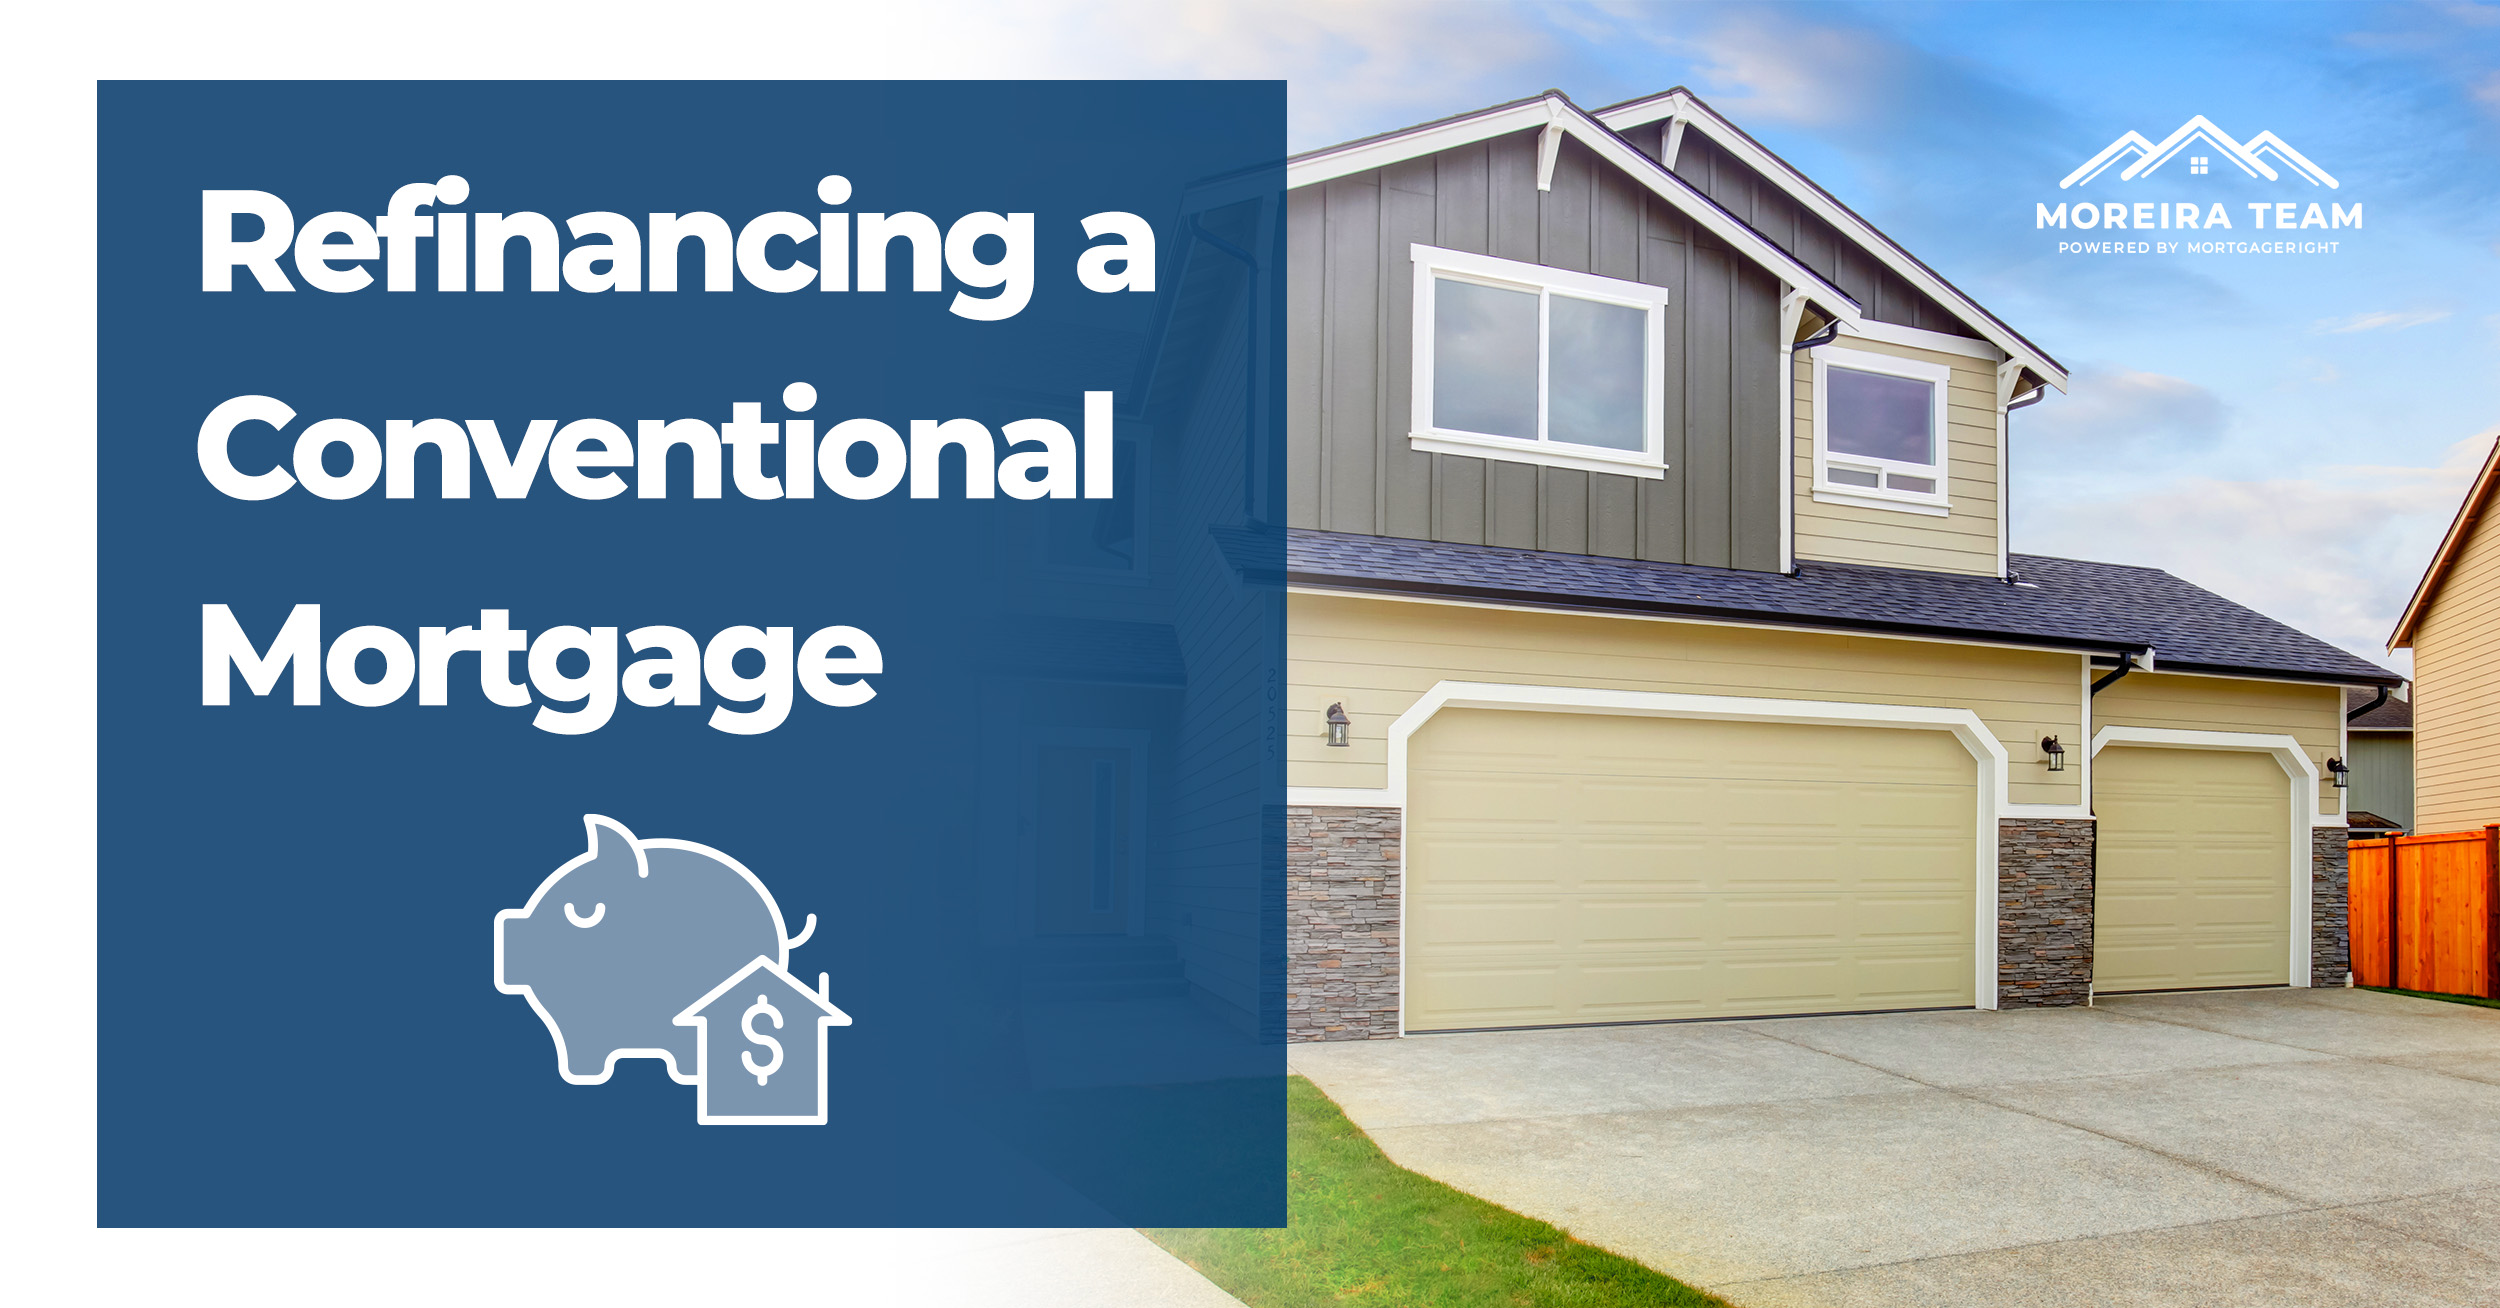 Refinancing a Conventional Mortgage